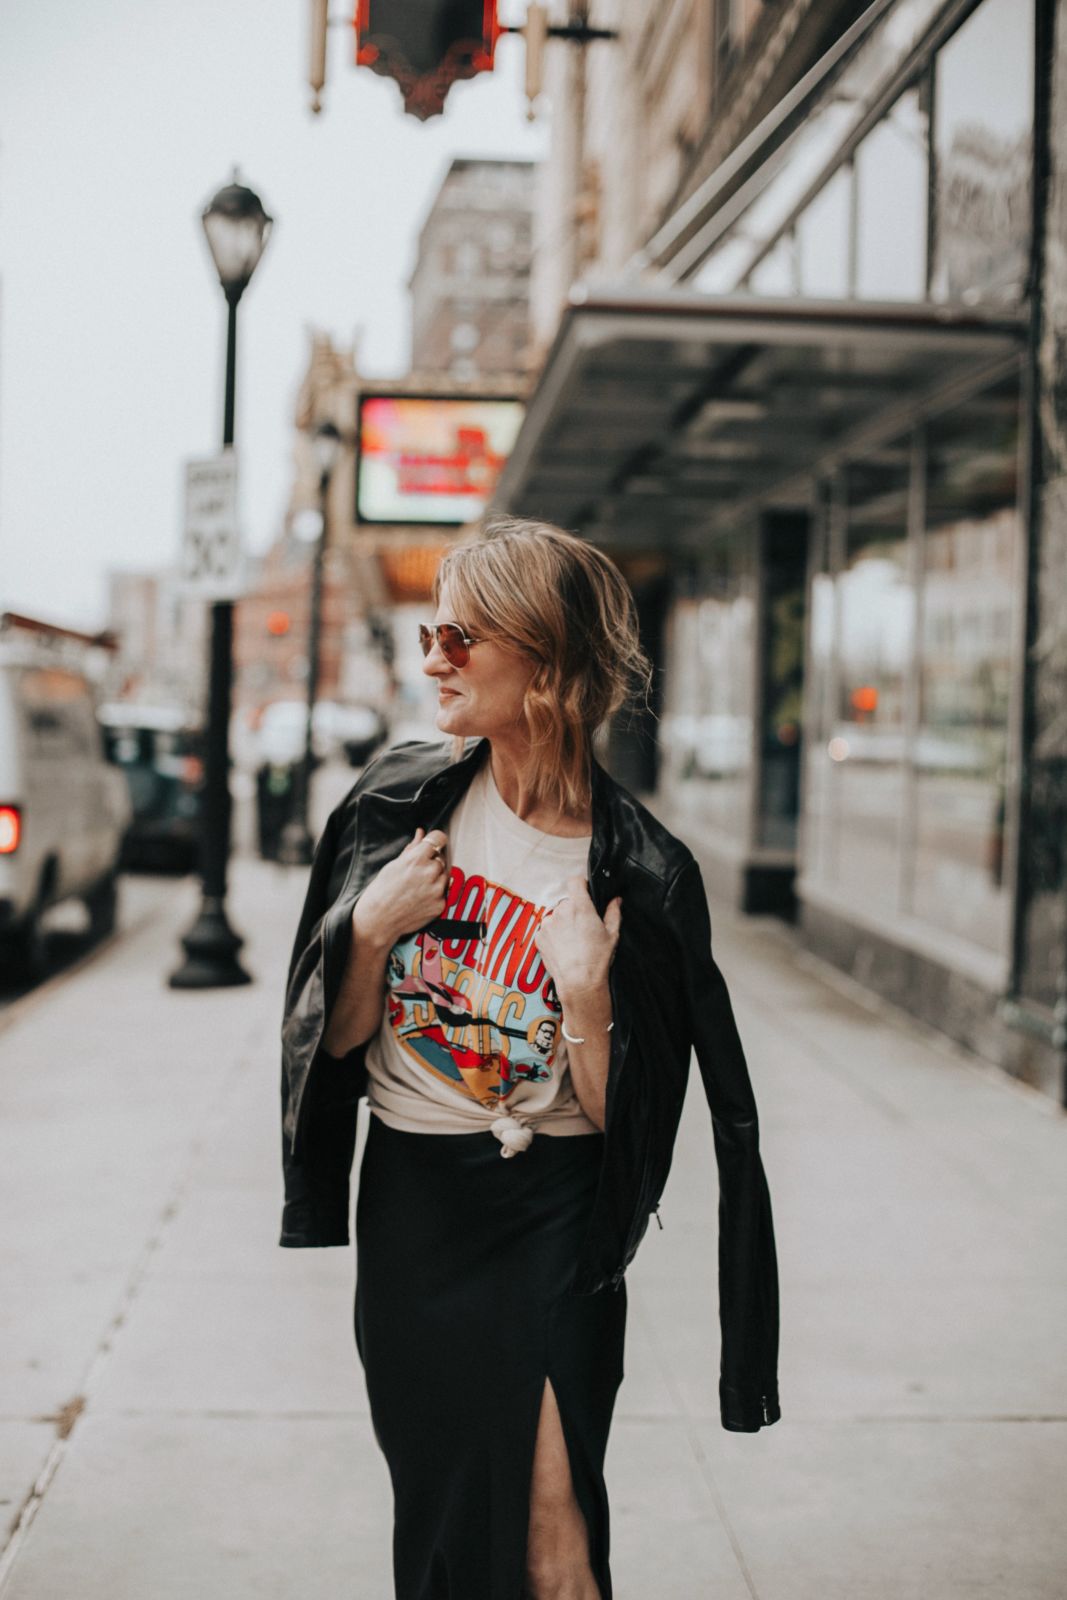 rolling stones graphic tee - styling a shirt over a dress 